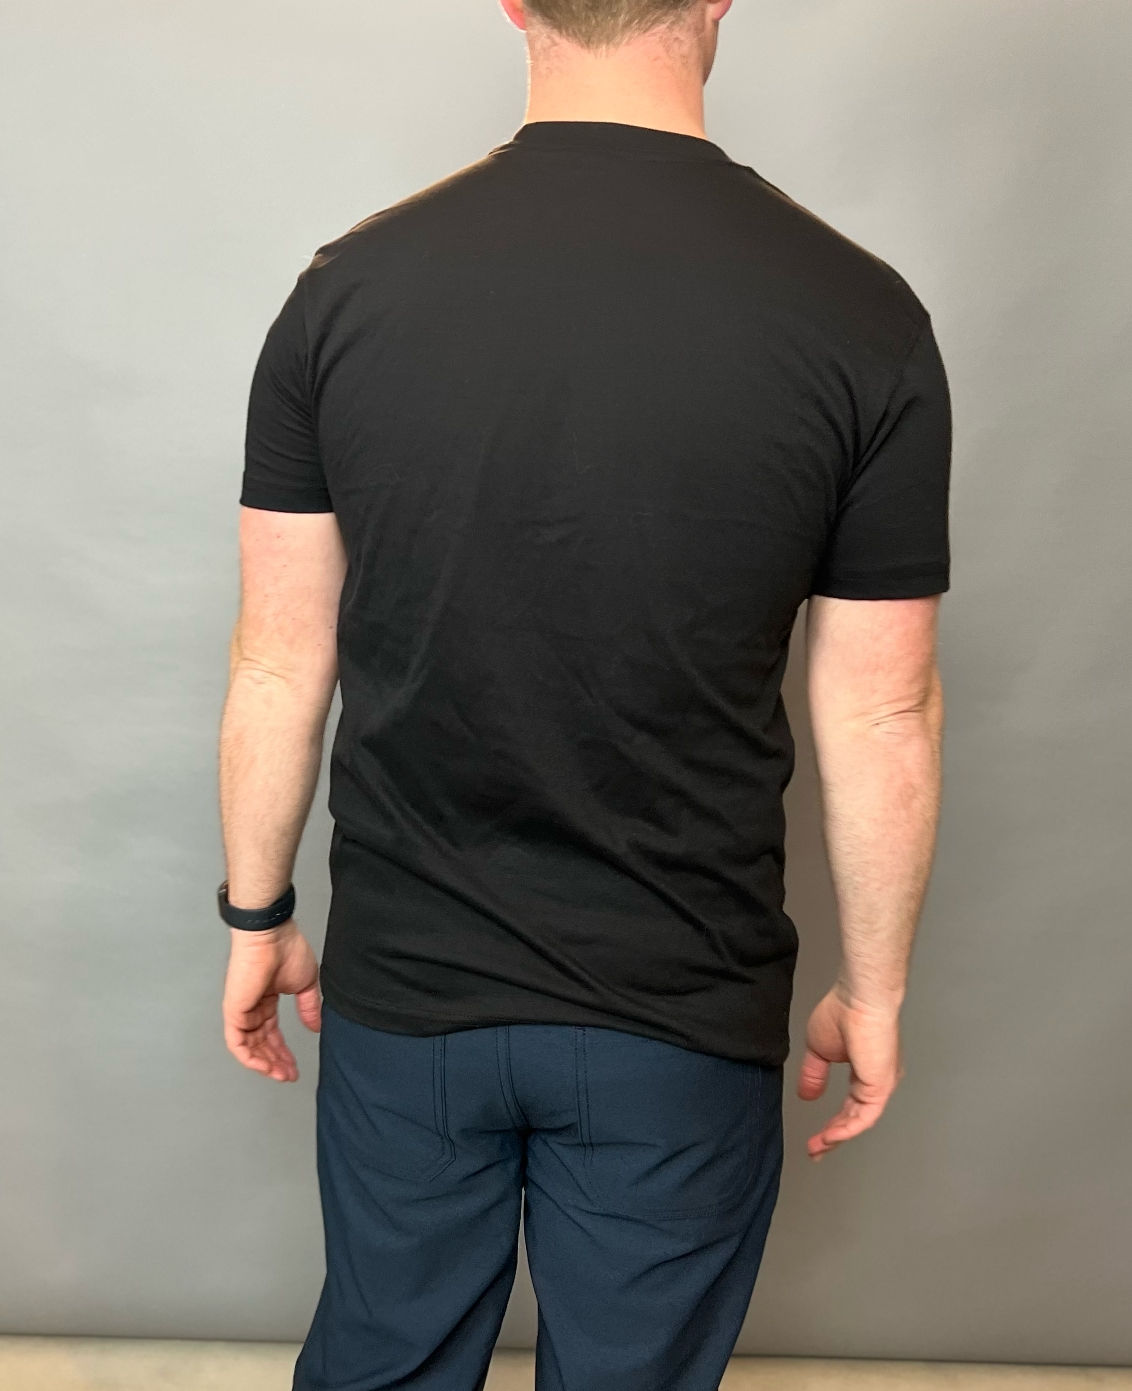 True Classic Tees Review: Don't buy before checking out our review 16